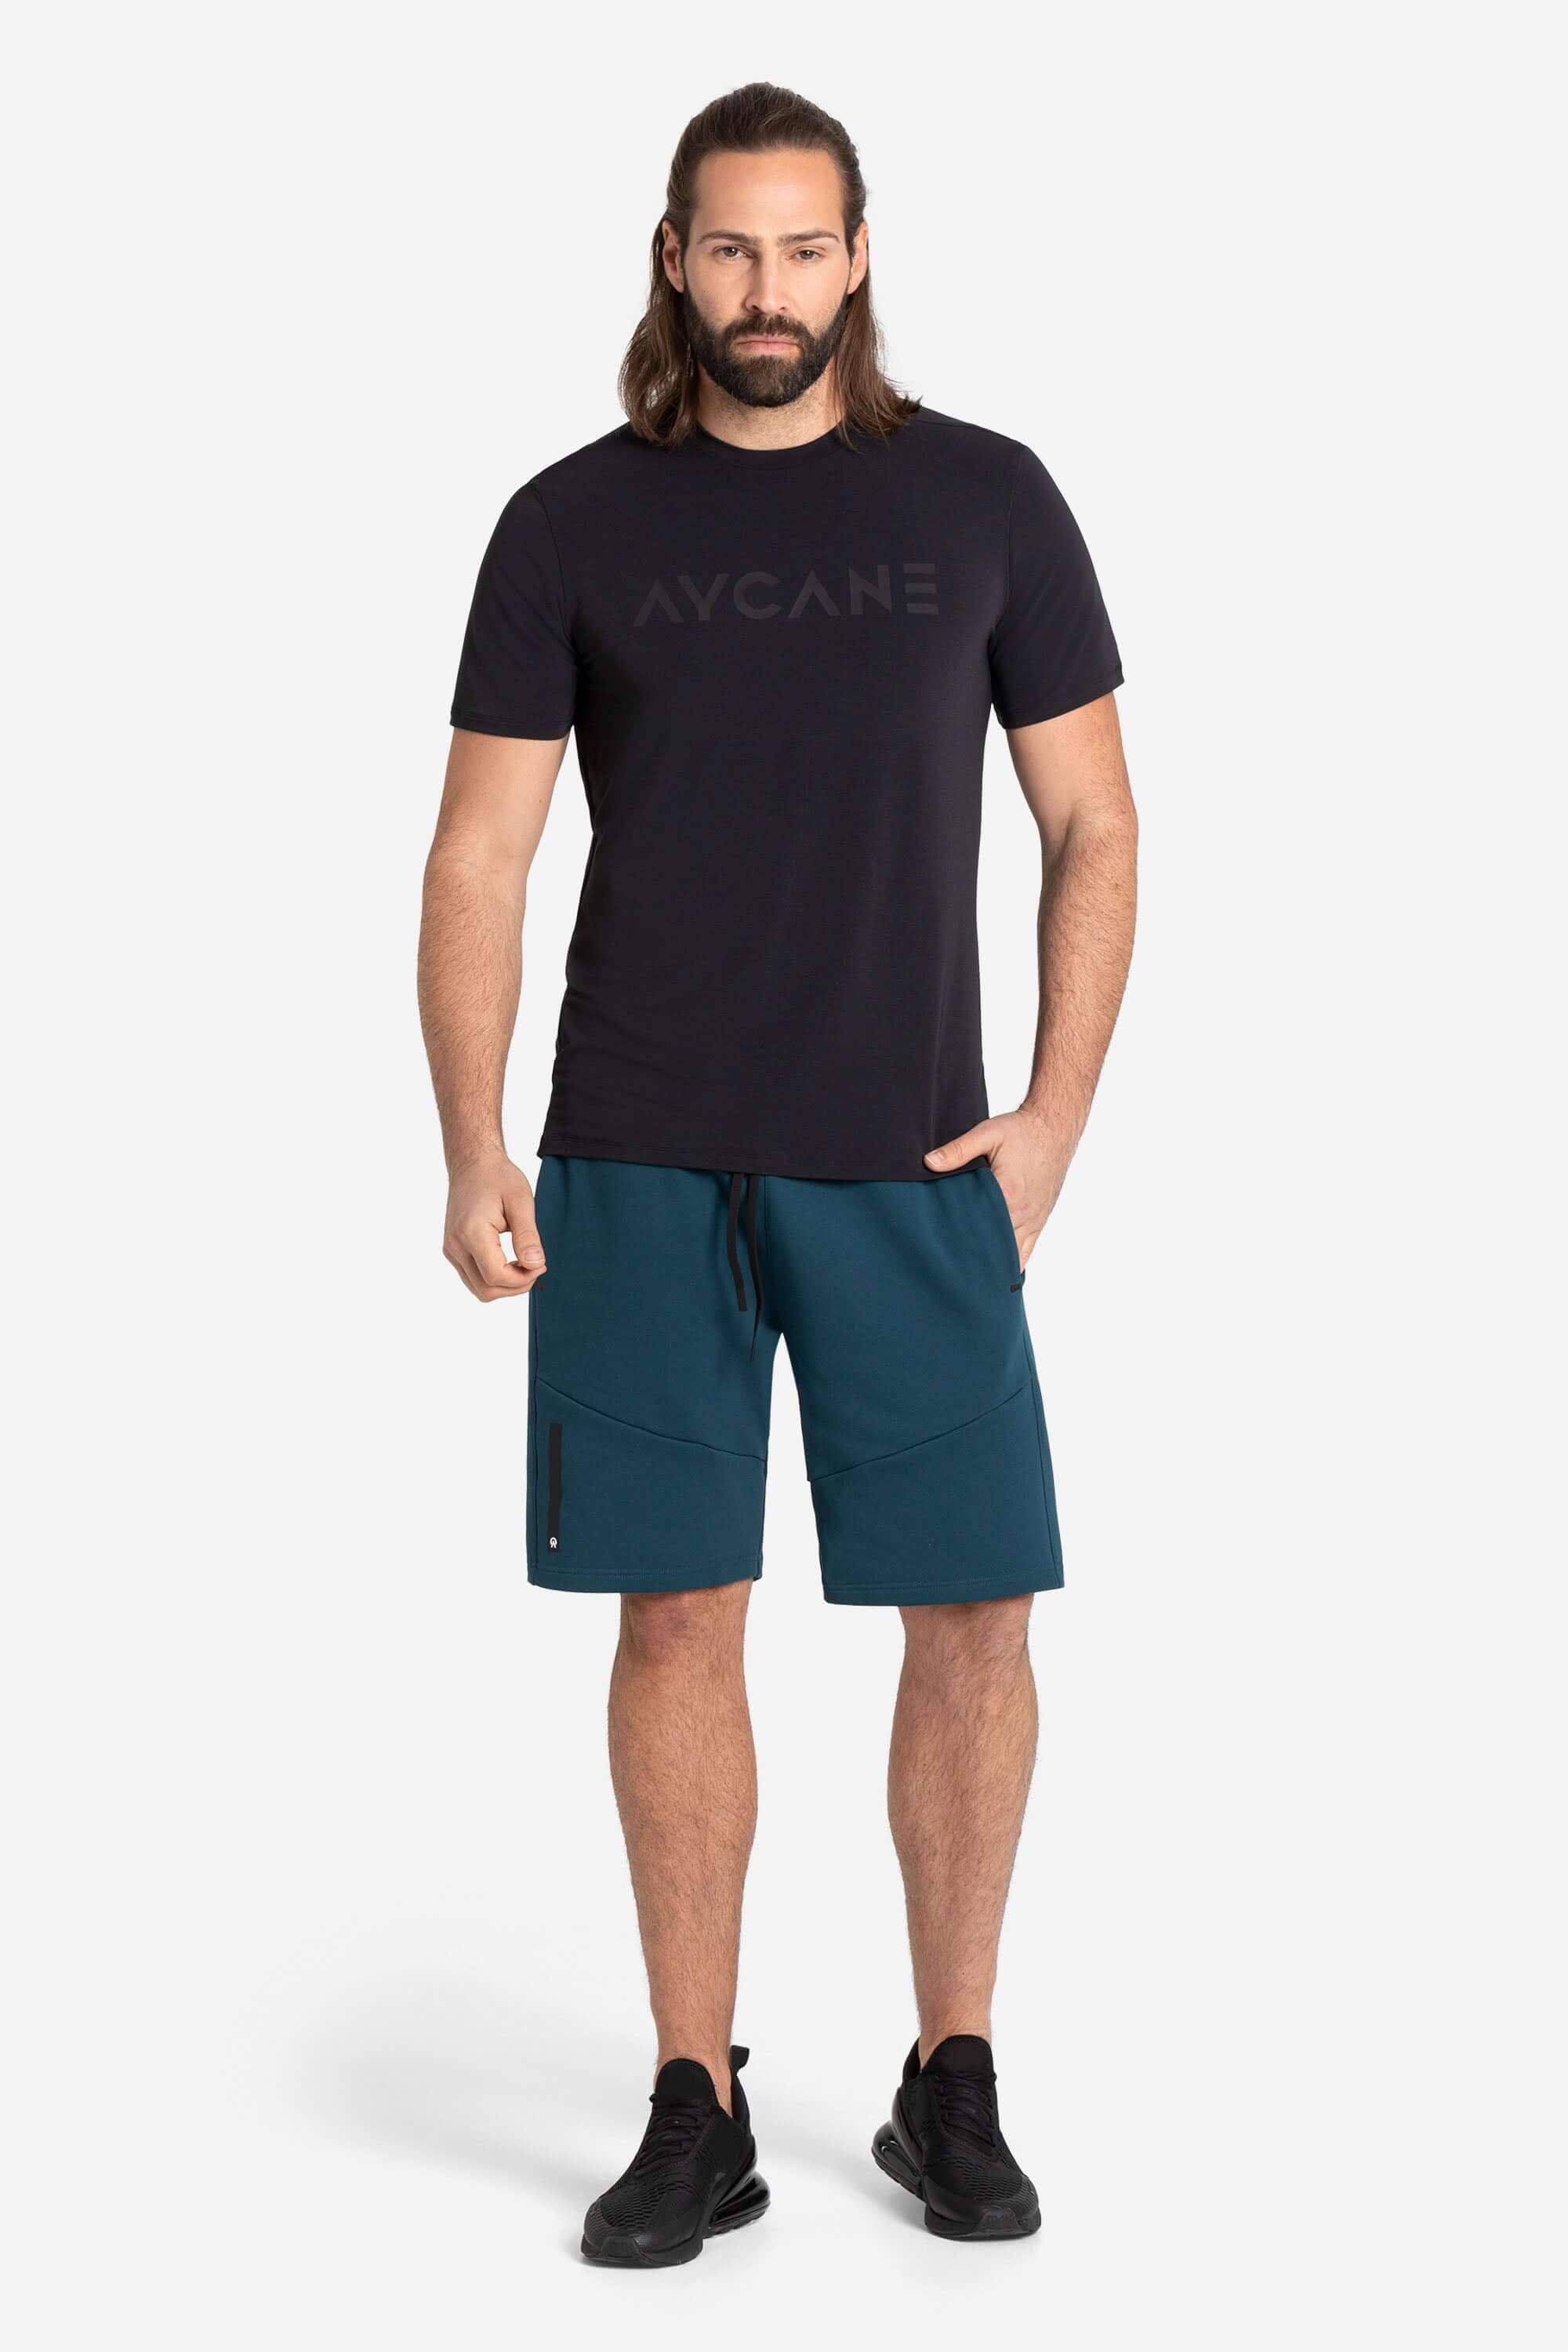 Men in a black training t-shirt with blue leisure shorts in blue from AYCANE